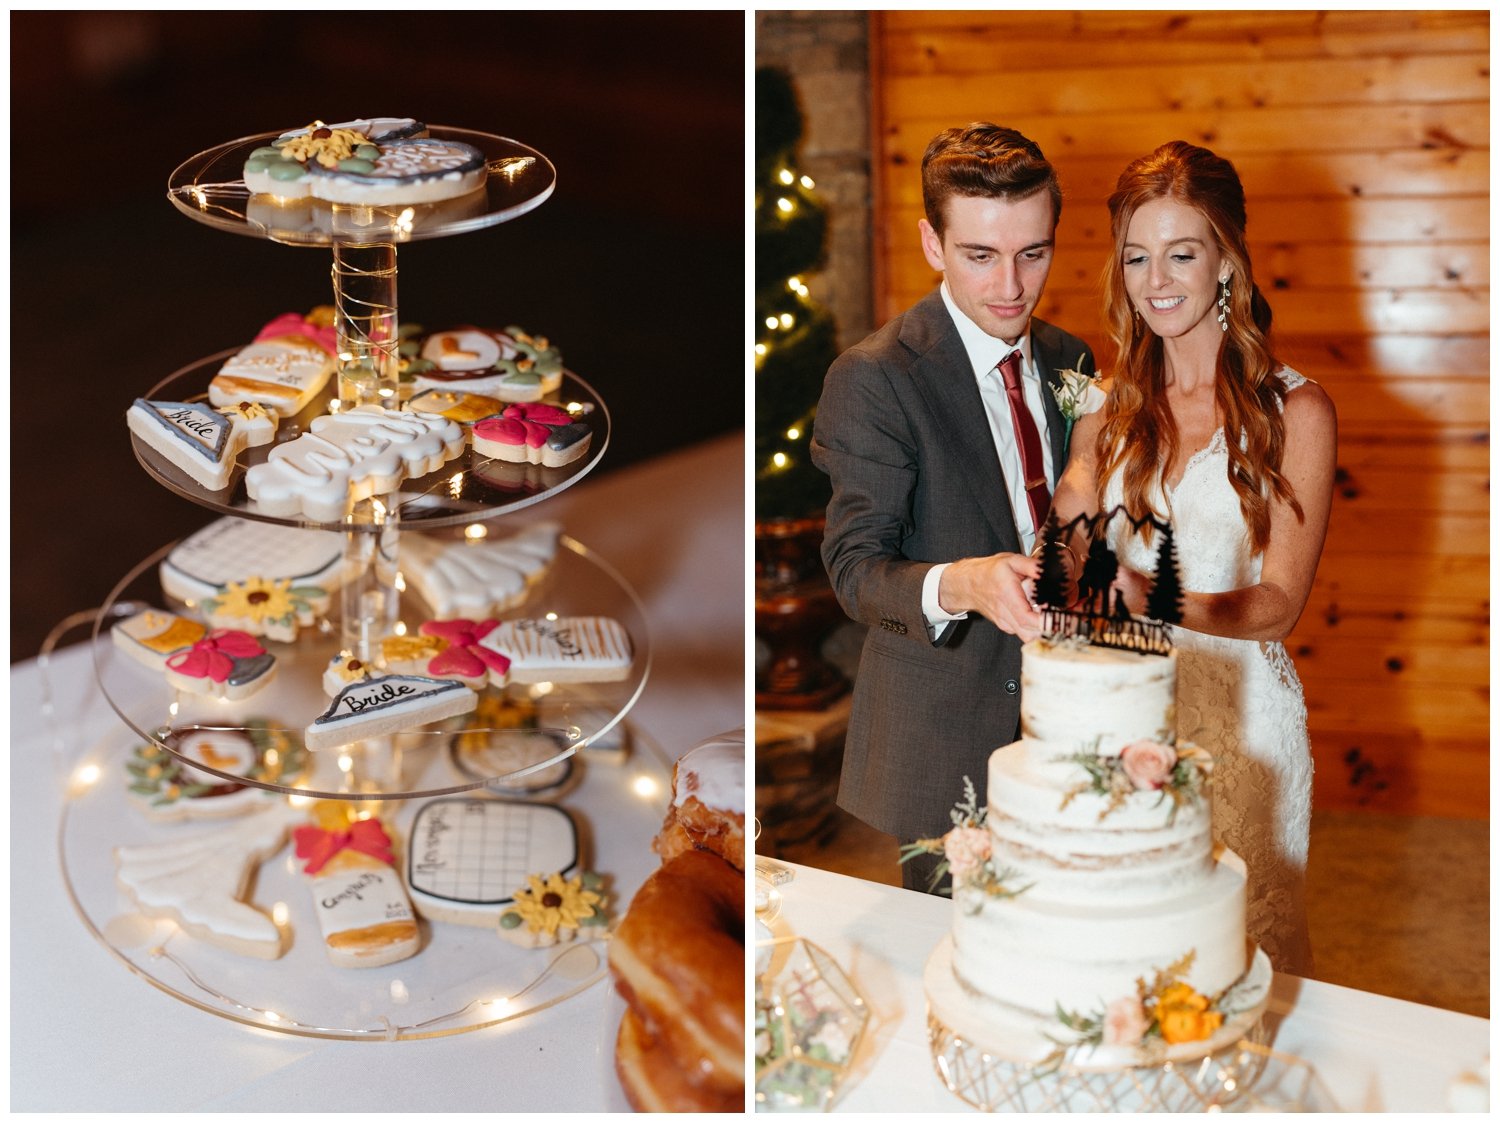 The couple cuts the cake at the mountain wedding venue